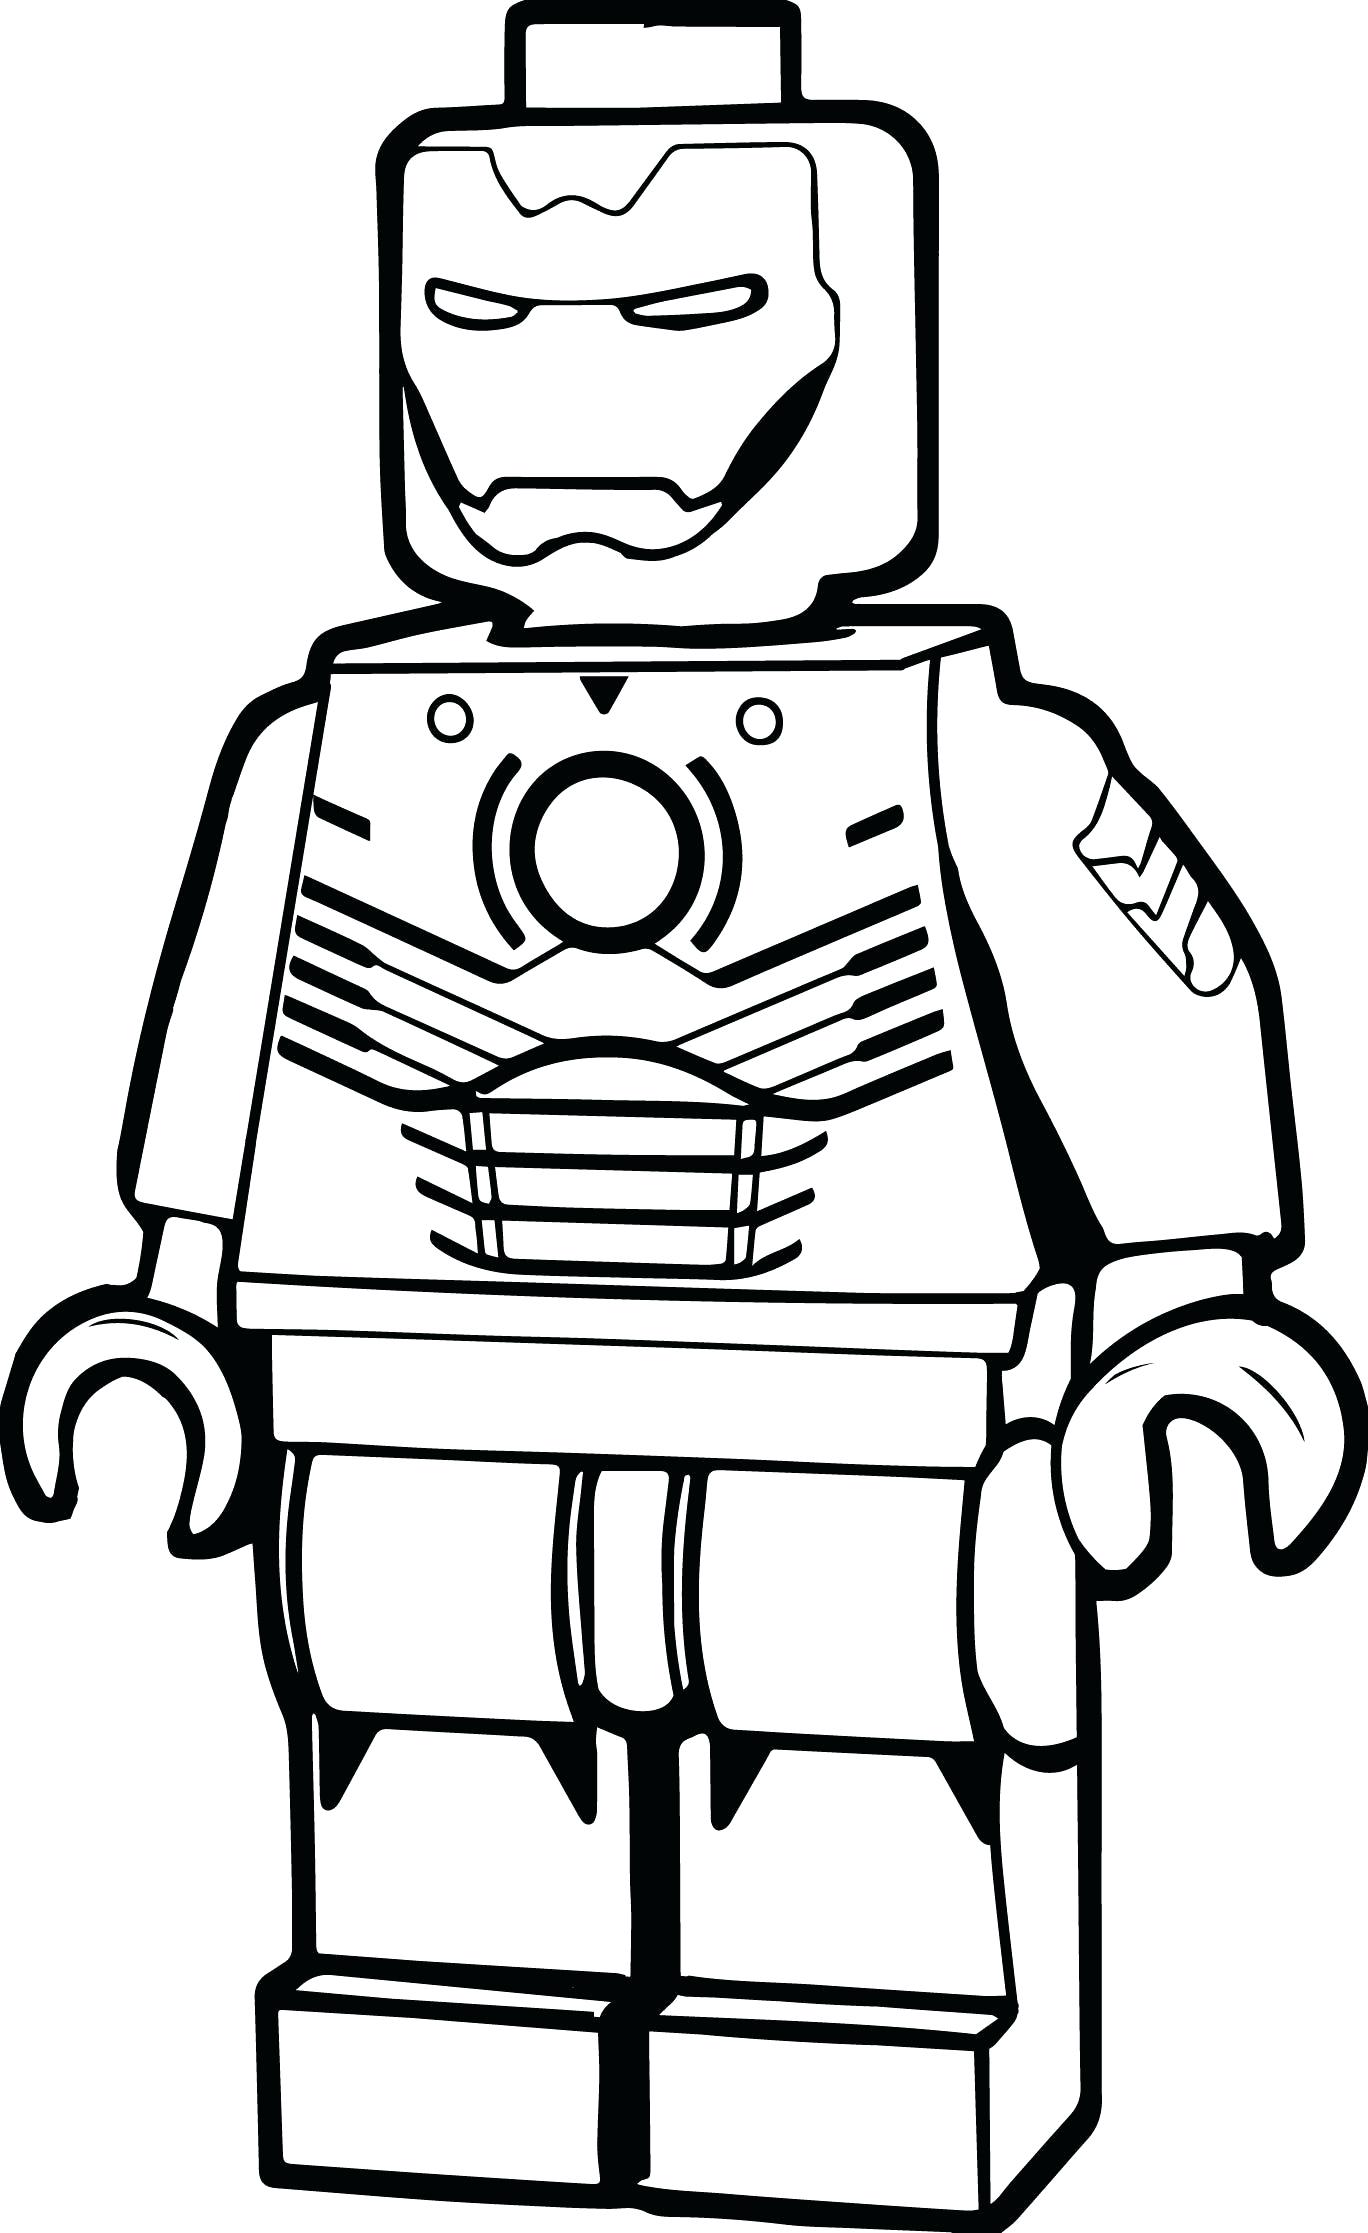 Coloring Pages : Lego Maning Pages Lagunapaper Co Awesome ...